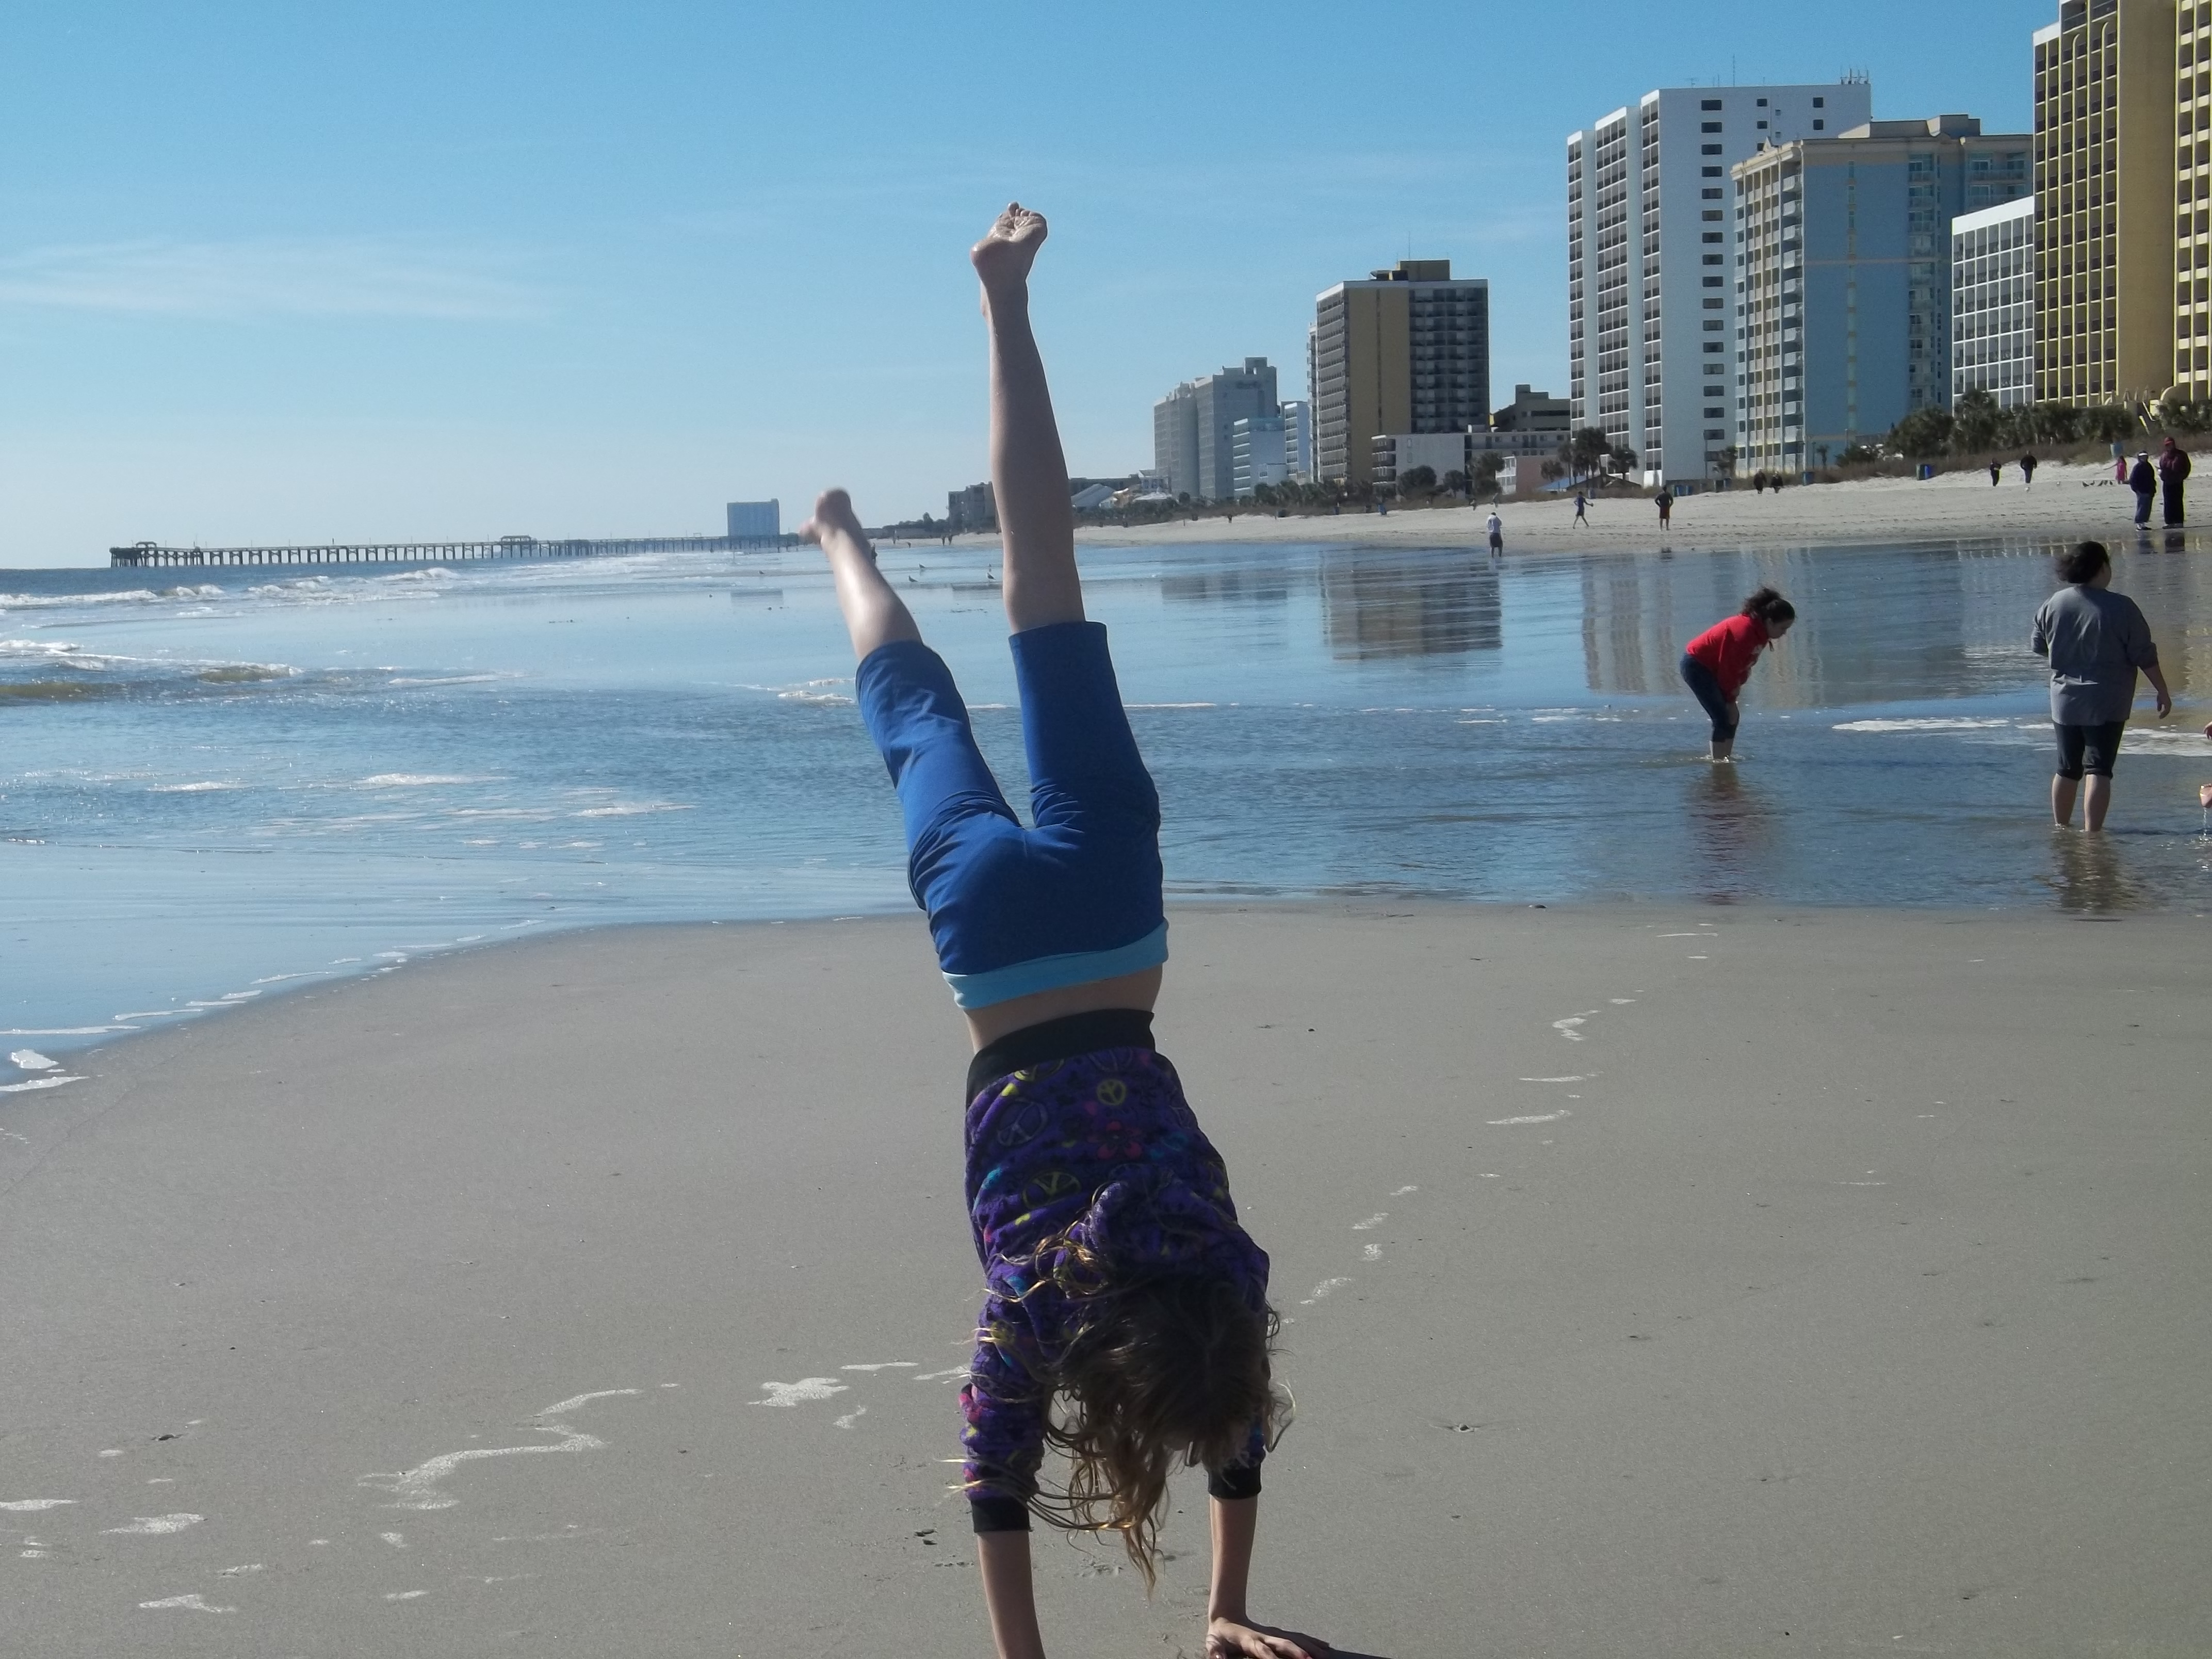 Daughter #1 on the beach